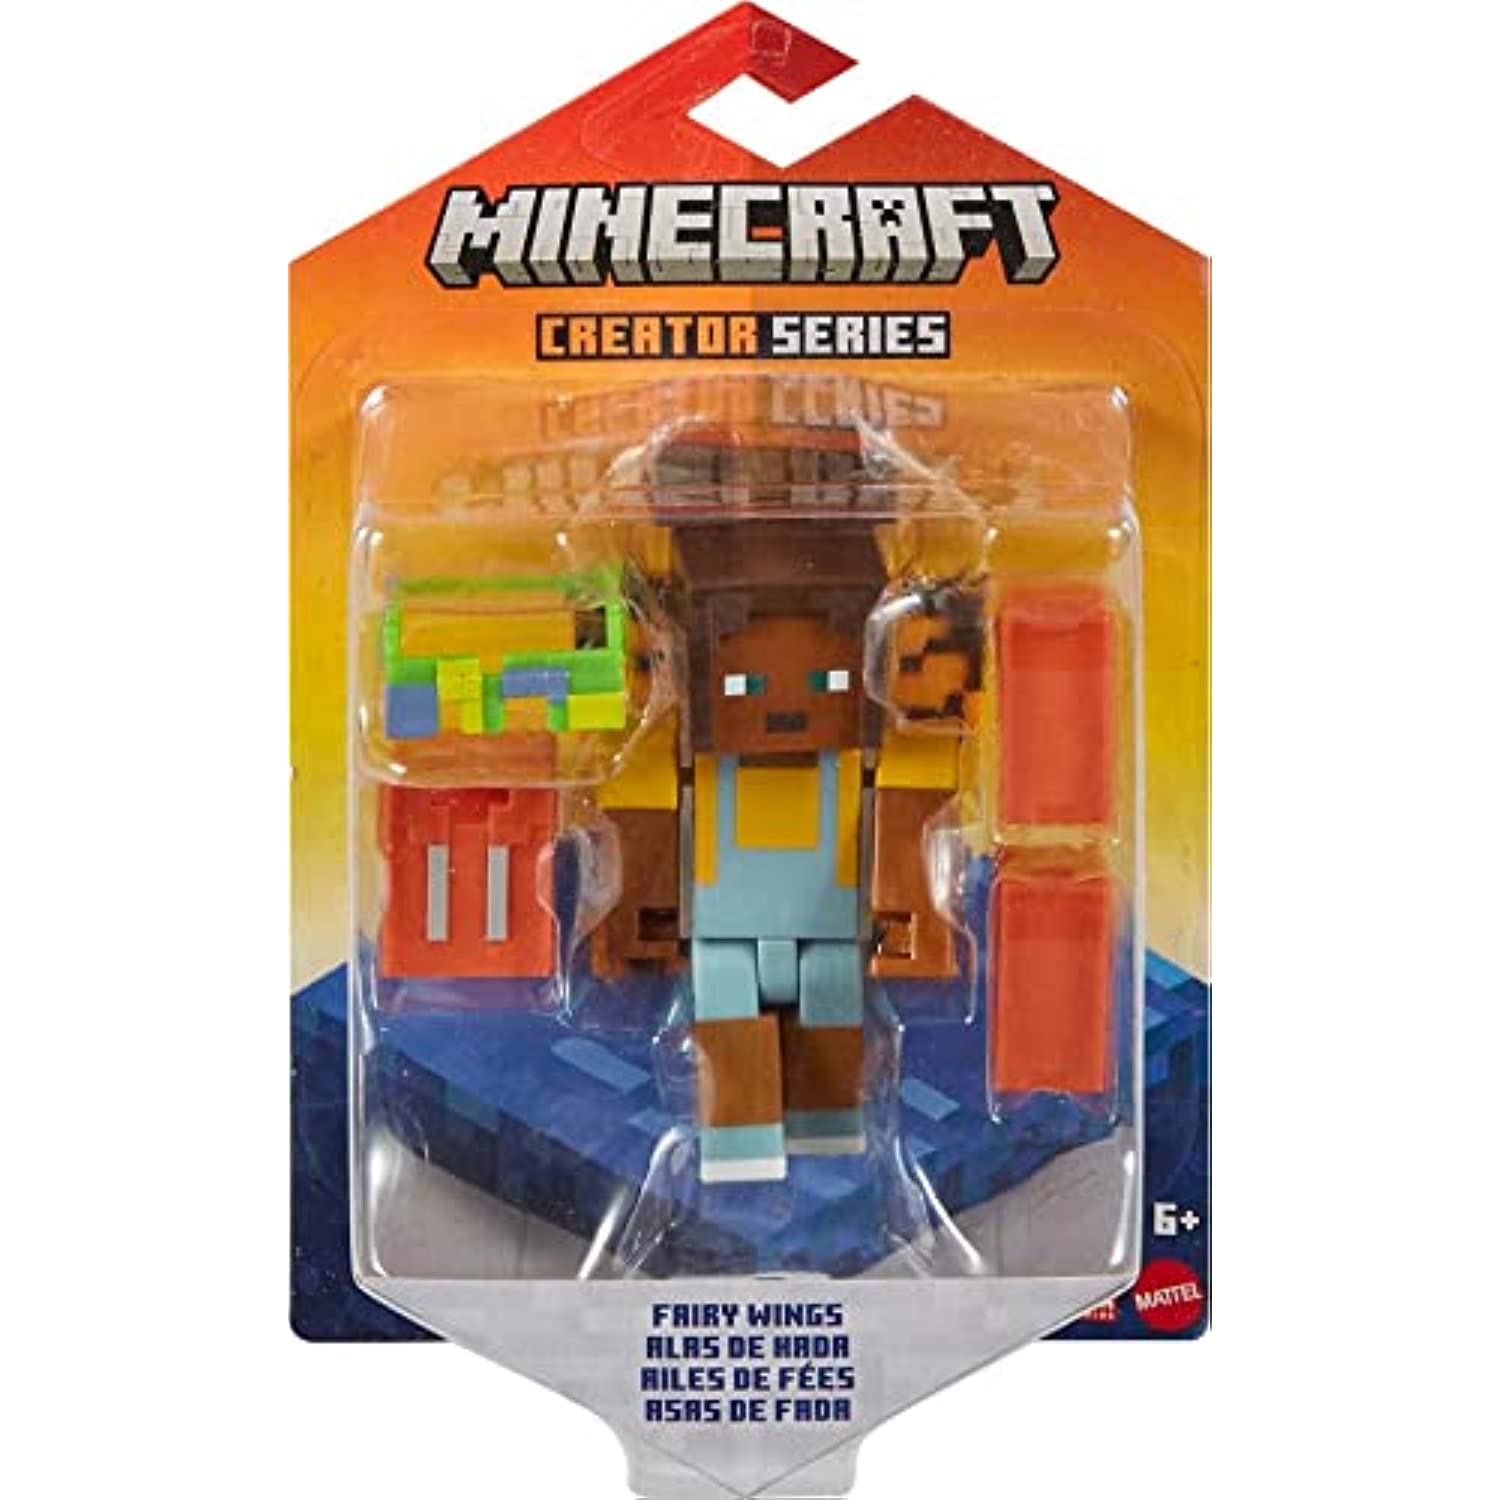 Minecraft Creator Series 3.25-in Action Figure (Fairy Wings) with Accessories